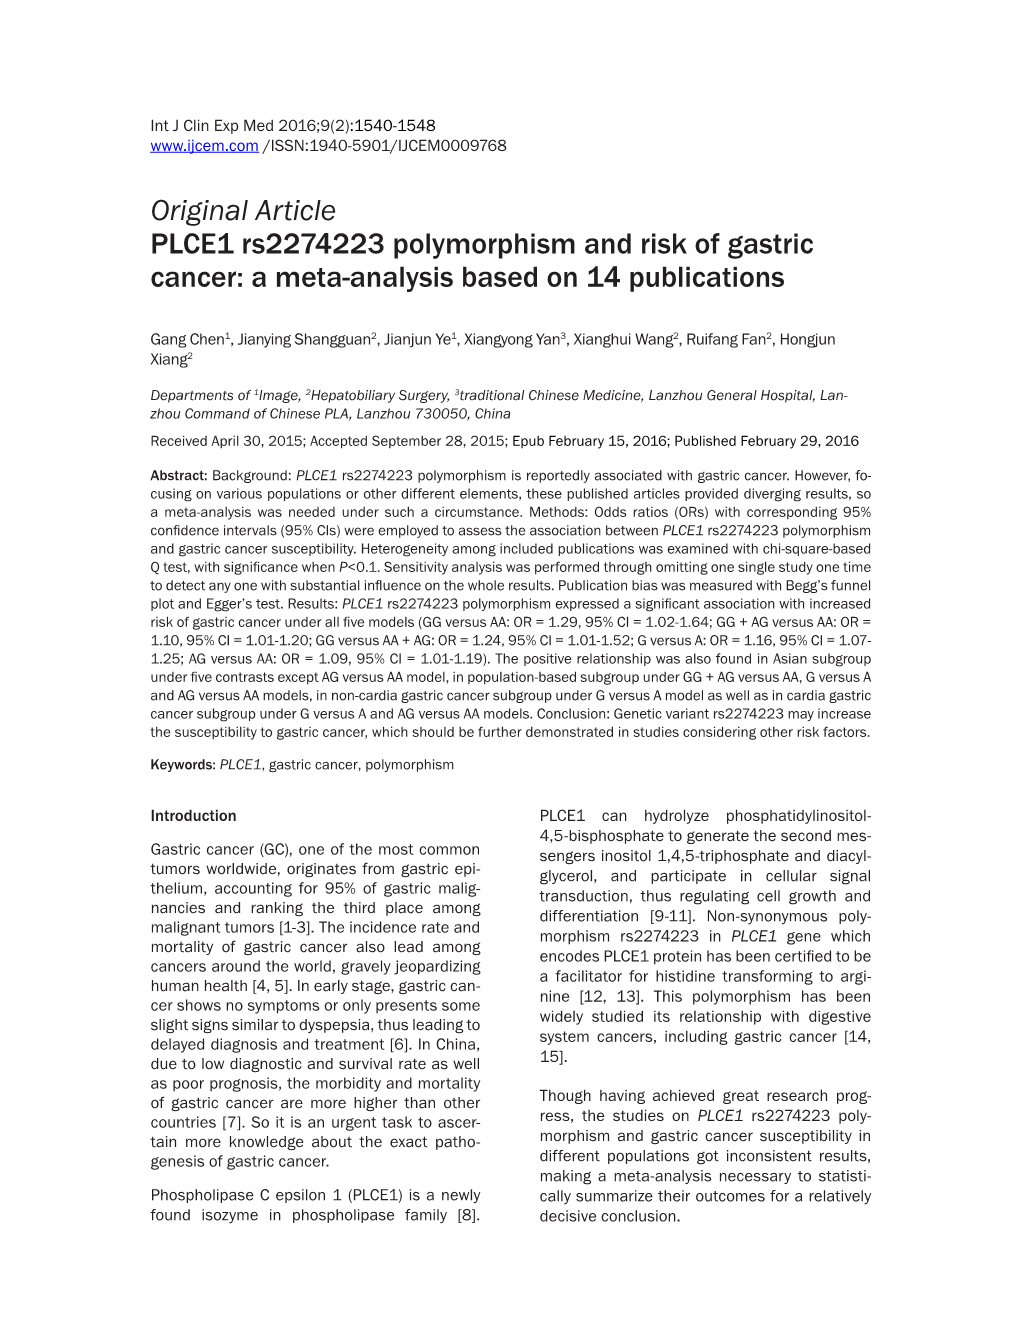 Original Article PLCE1 Rs2274223 Polymorphism and Risk of Gastric Cancer: a Meta-Analysis Based on 14 Publications